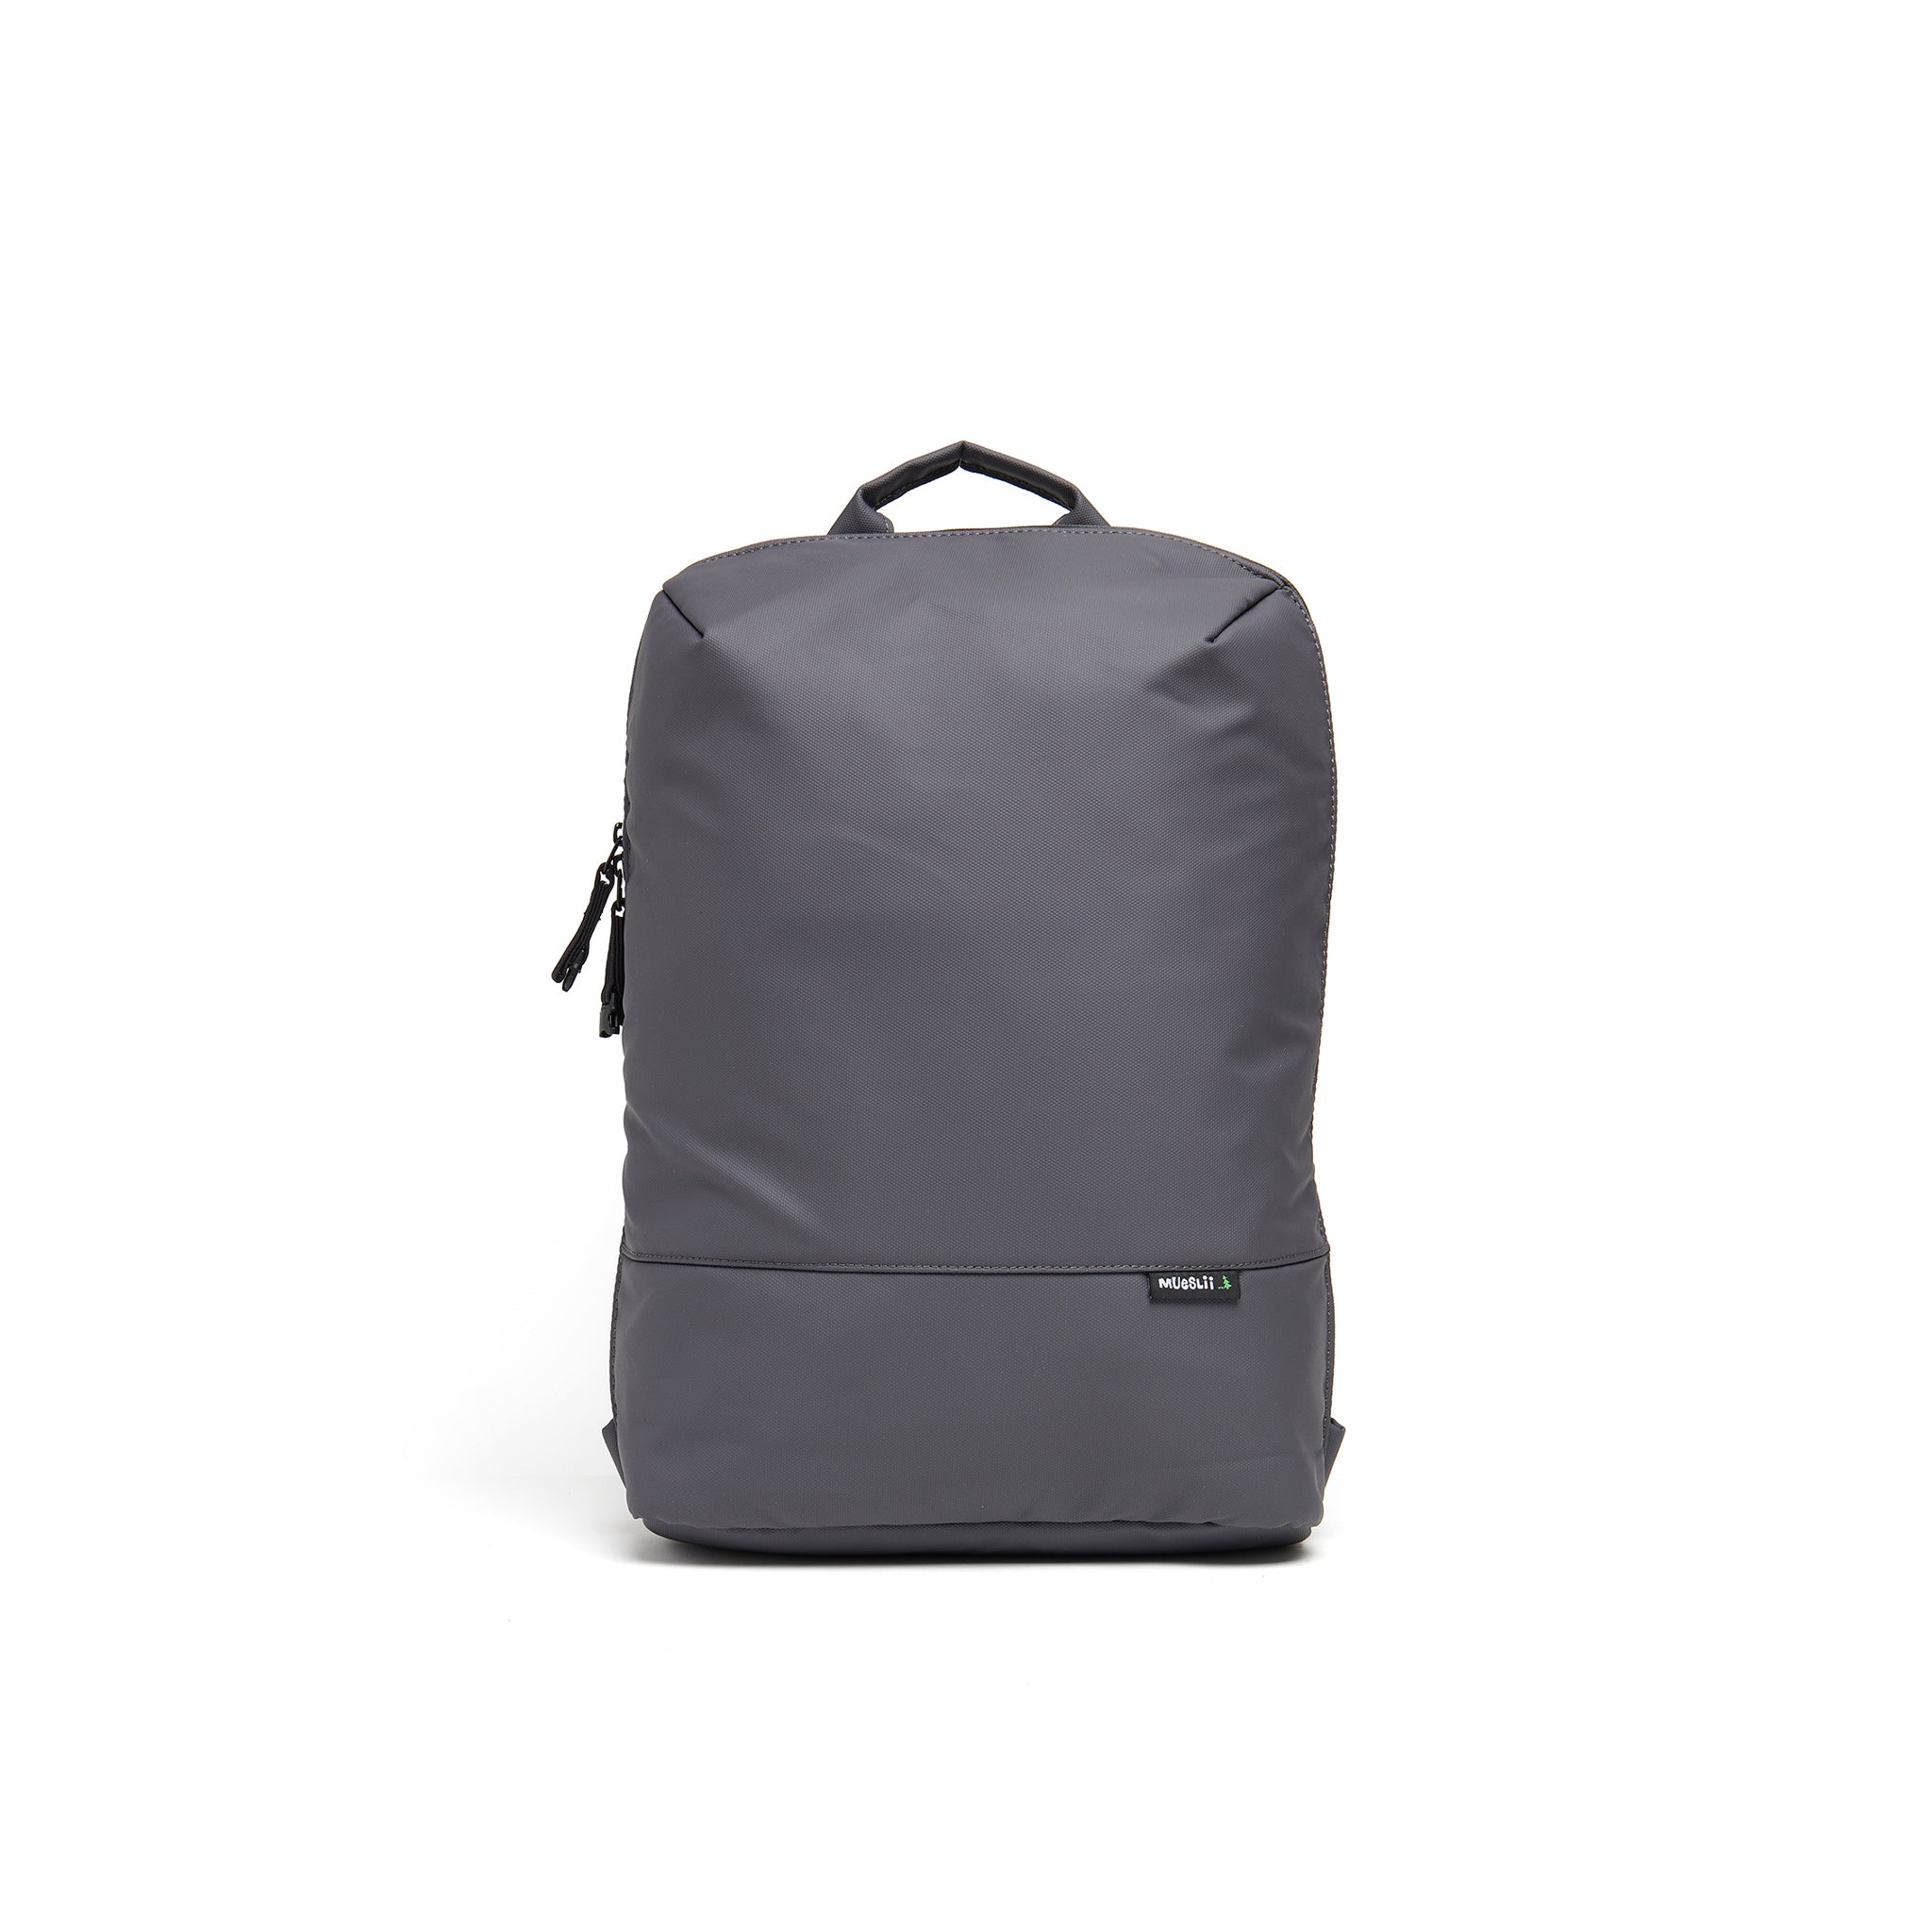 Mueslii small backpack, made of PU coated waterproof nylon, with a laptop compartment, color grey, front view.